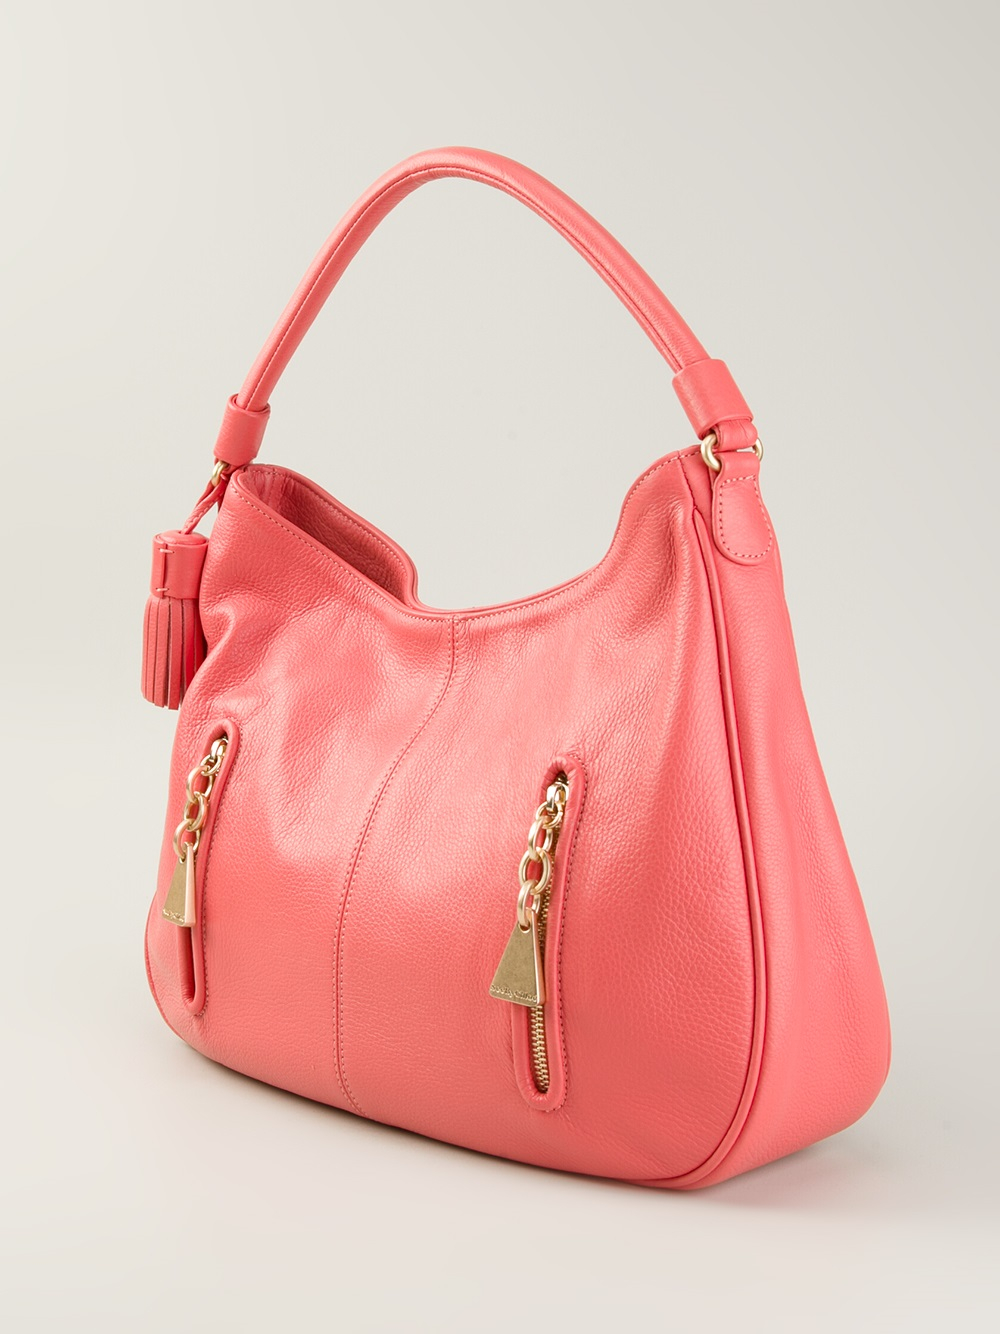 Lyst See By Chloé Cherry Hobo Shoulder Bag In Pink 5608